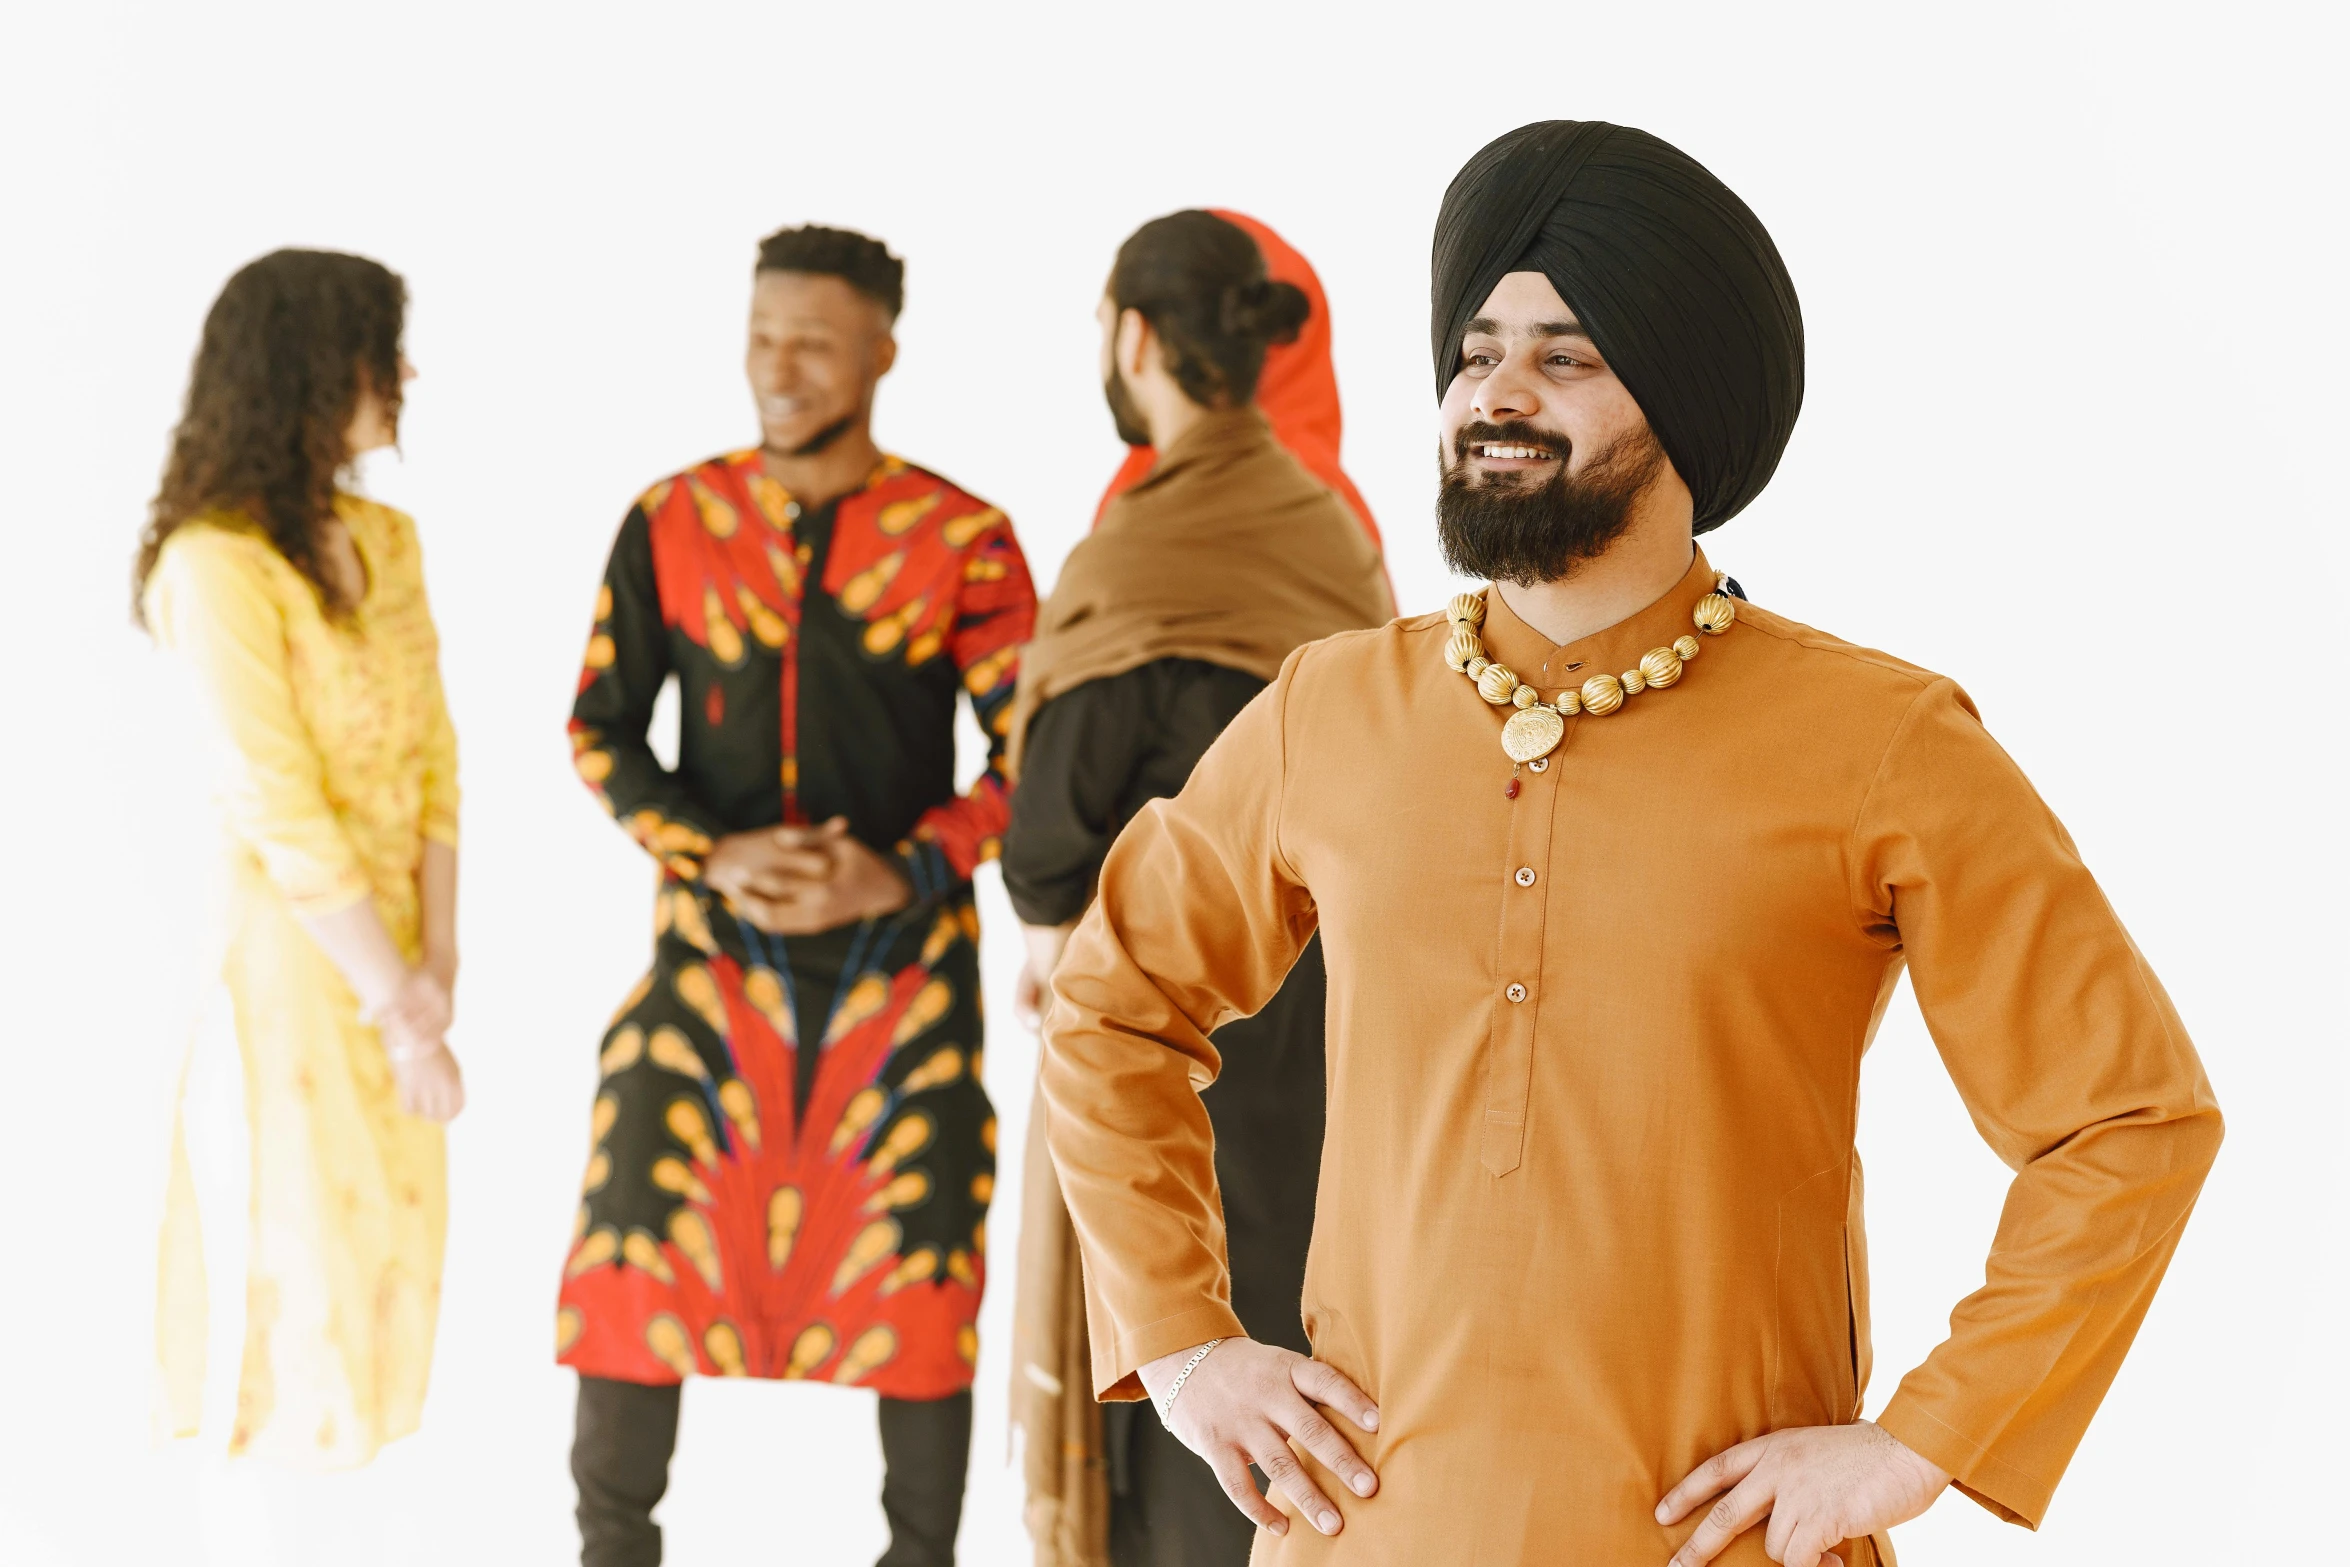 man in an orange turban, and others wearing dress clothes